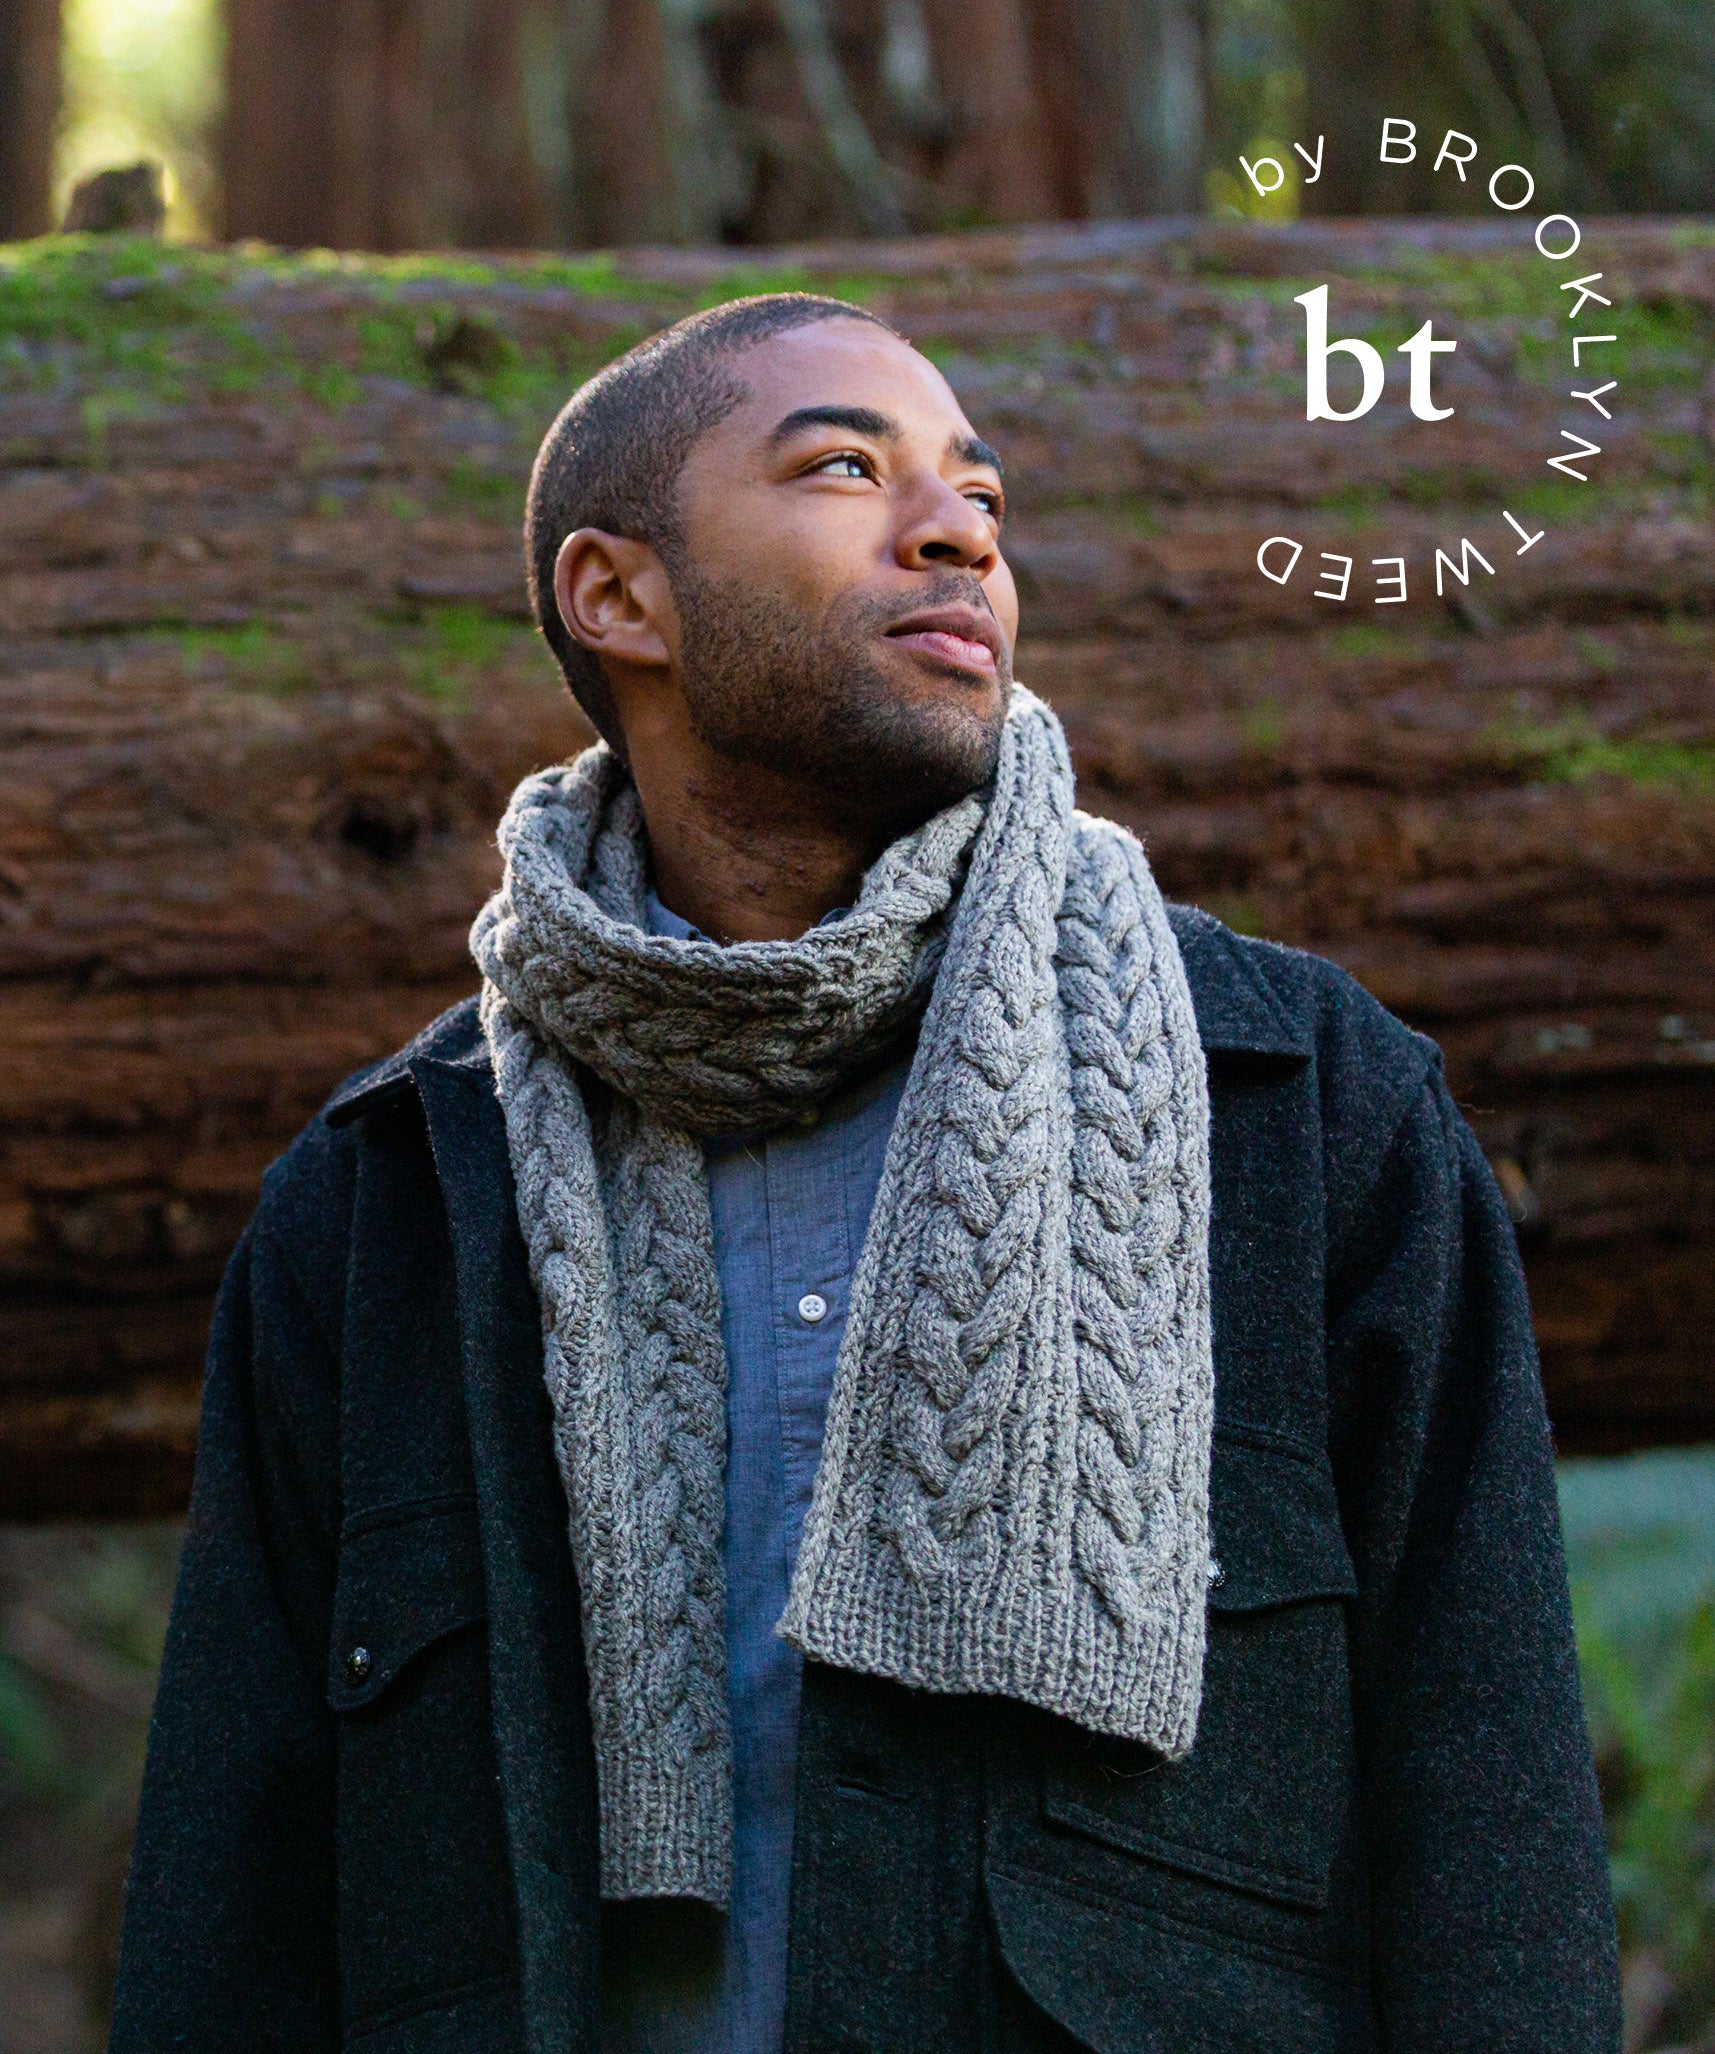 Woven Roots Scarf, Knitting Pattern by Jared Flood